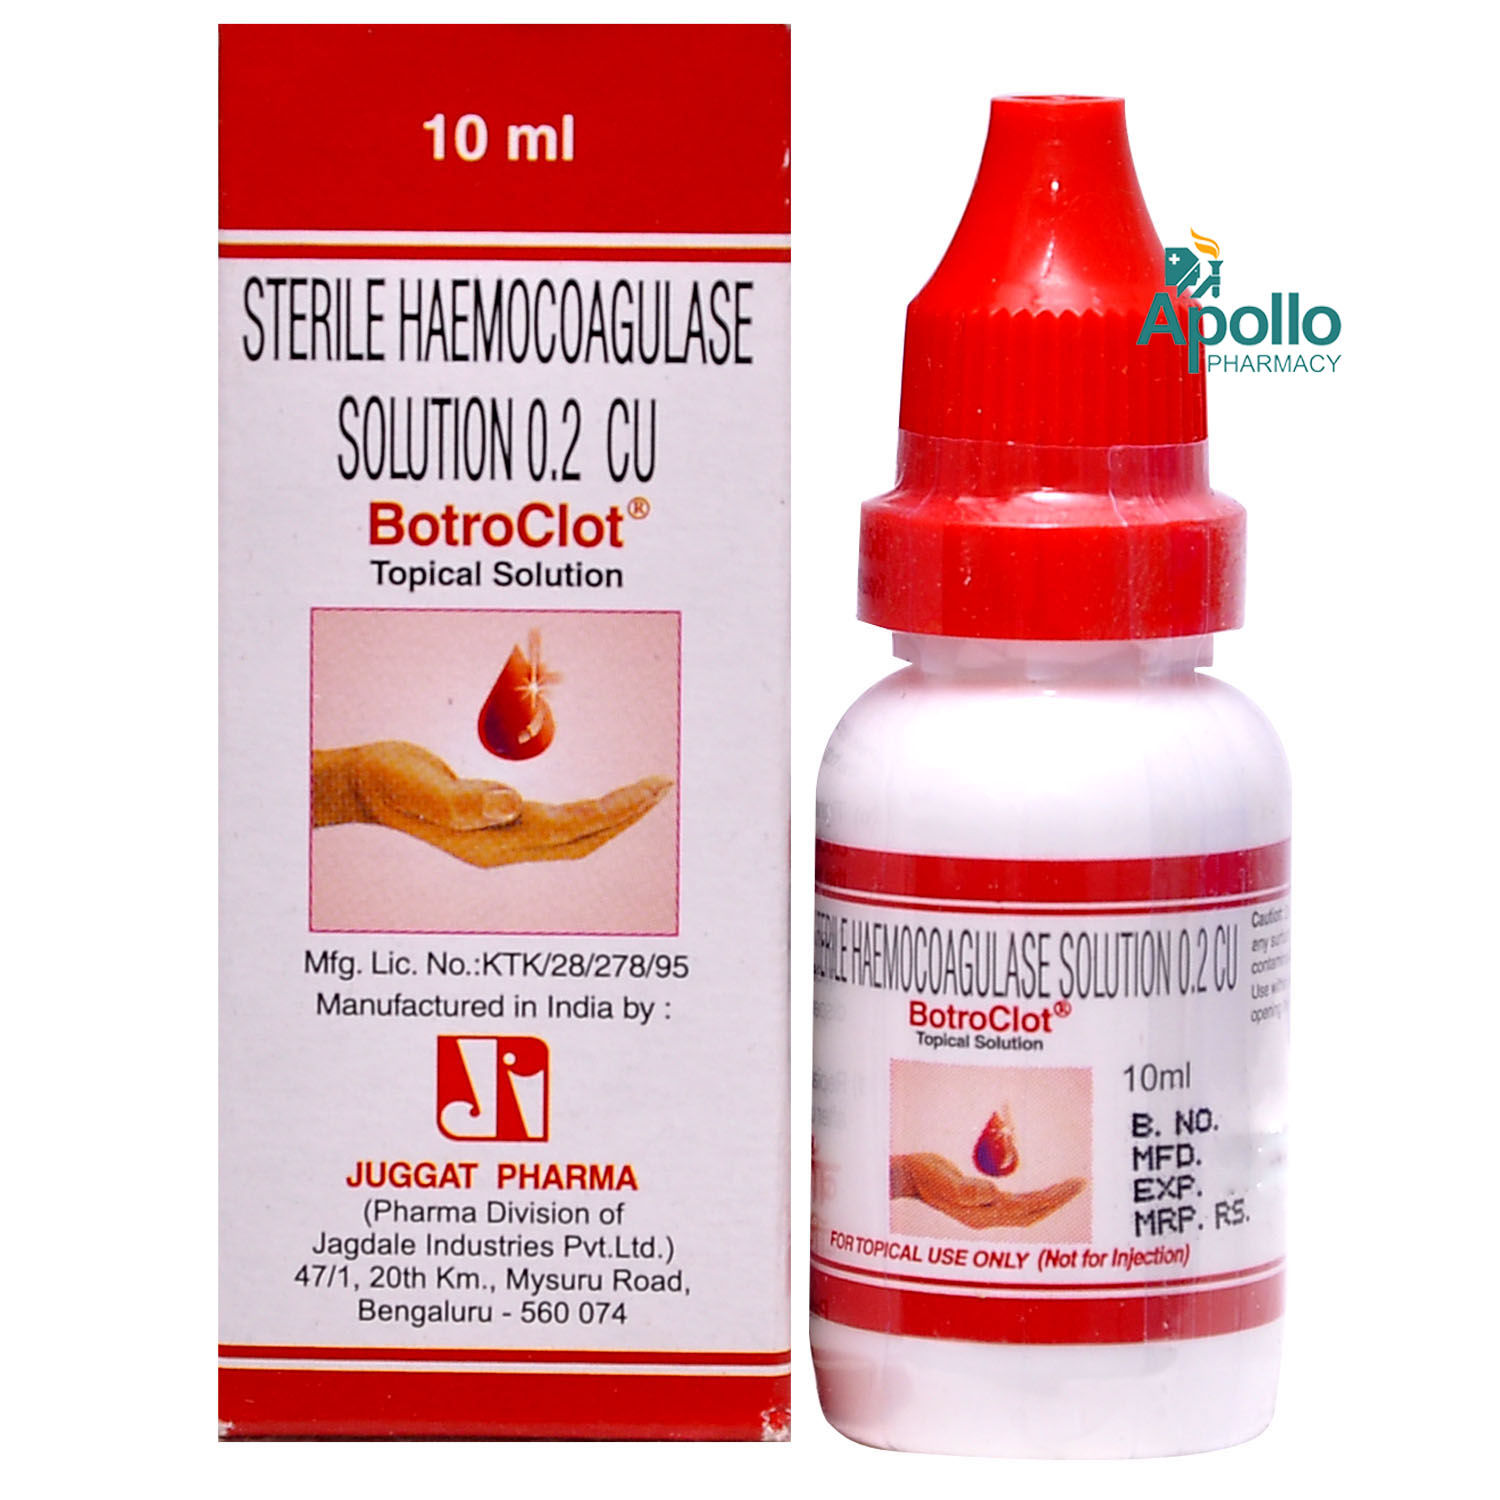 Botroclot Topical Solution 10 ml, Pack of 1 SOLUTION